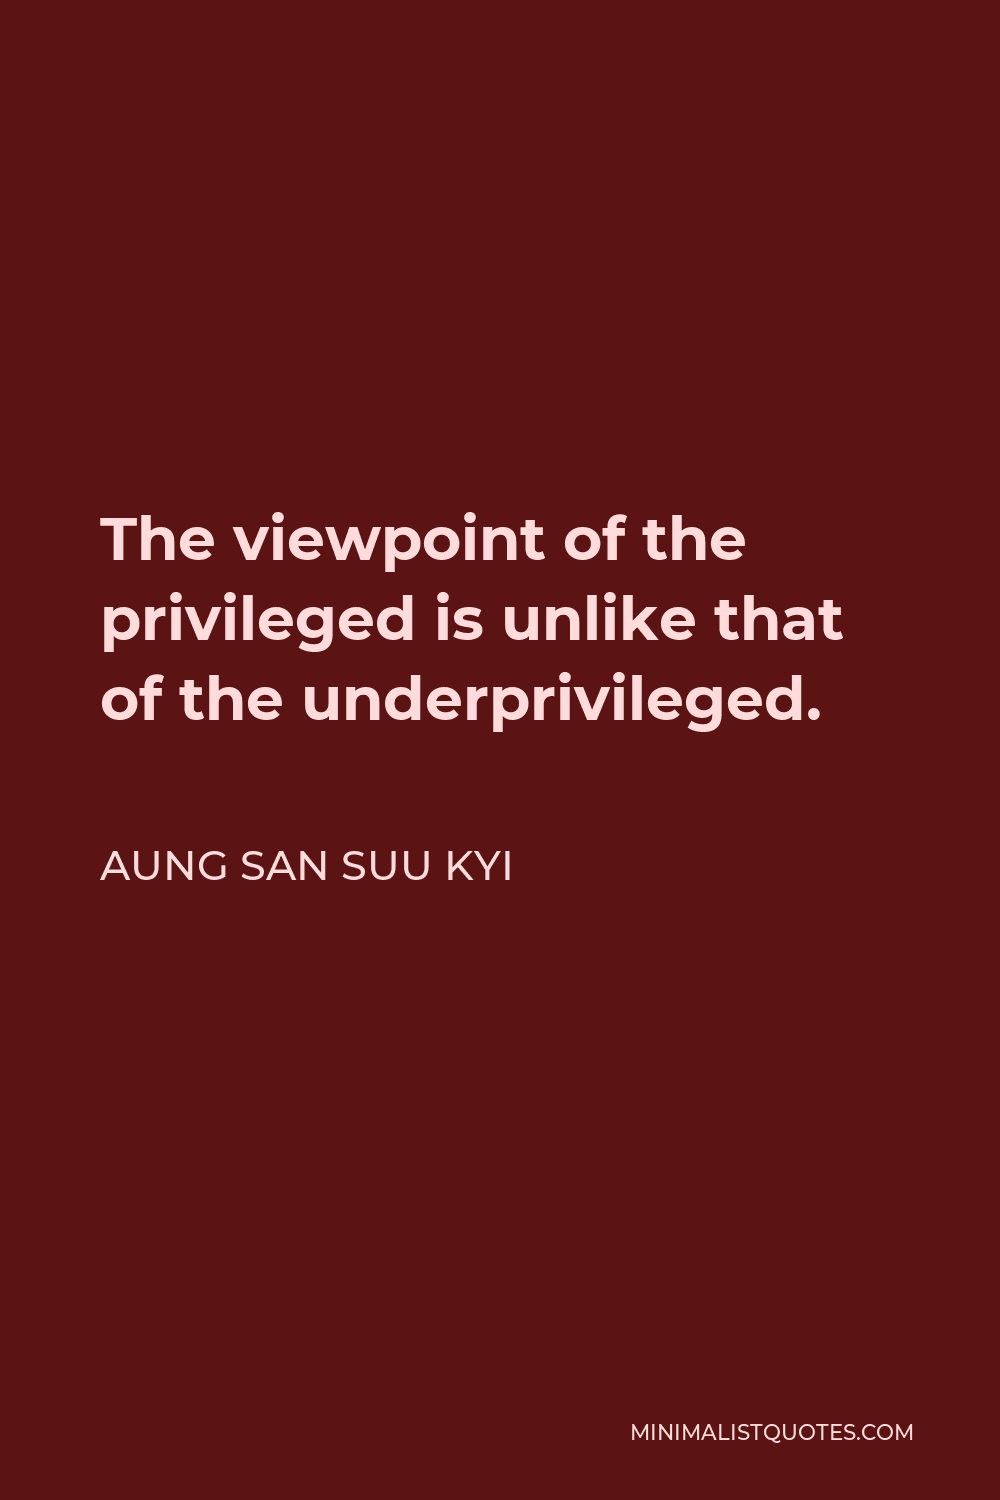 Aung San Suu Kyi Quote - The viewpoint of the privileged is unlike that of the underprivileged.